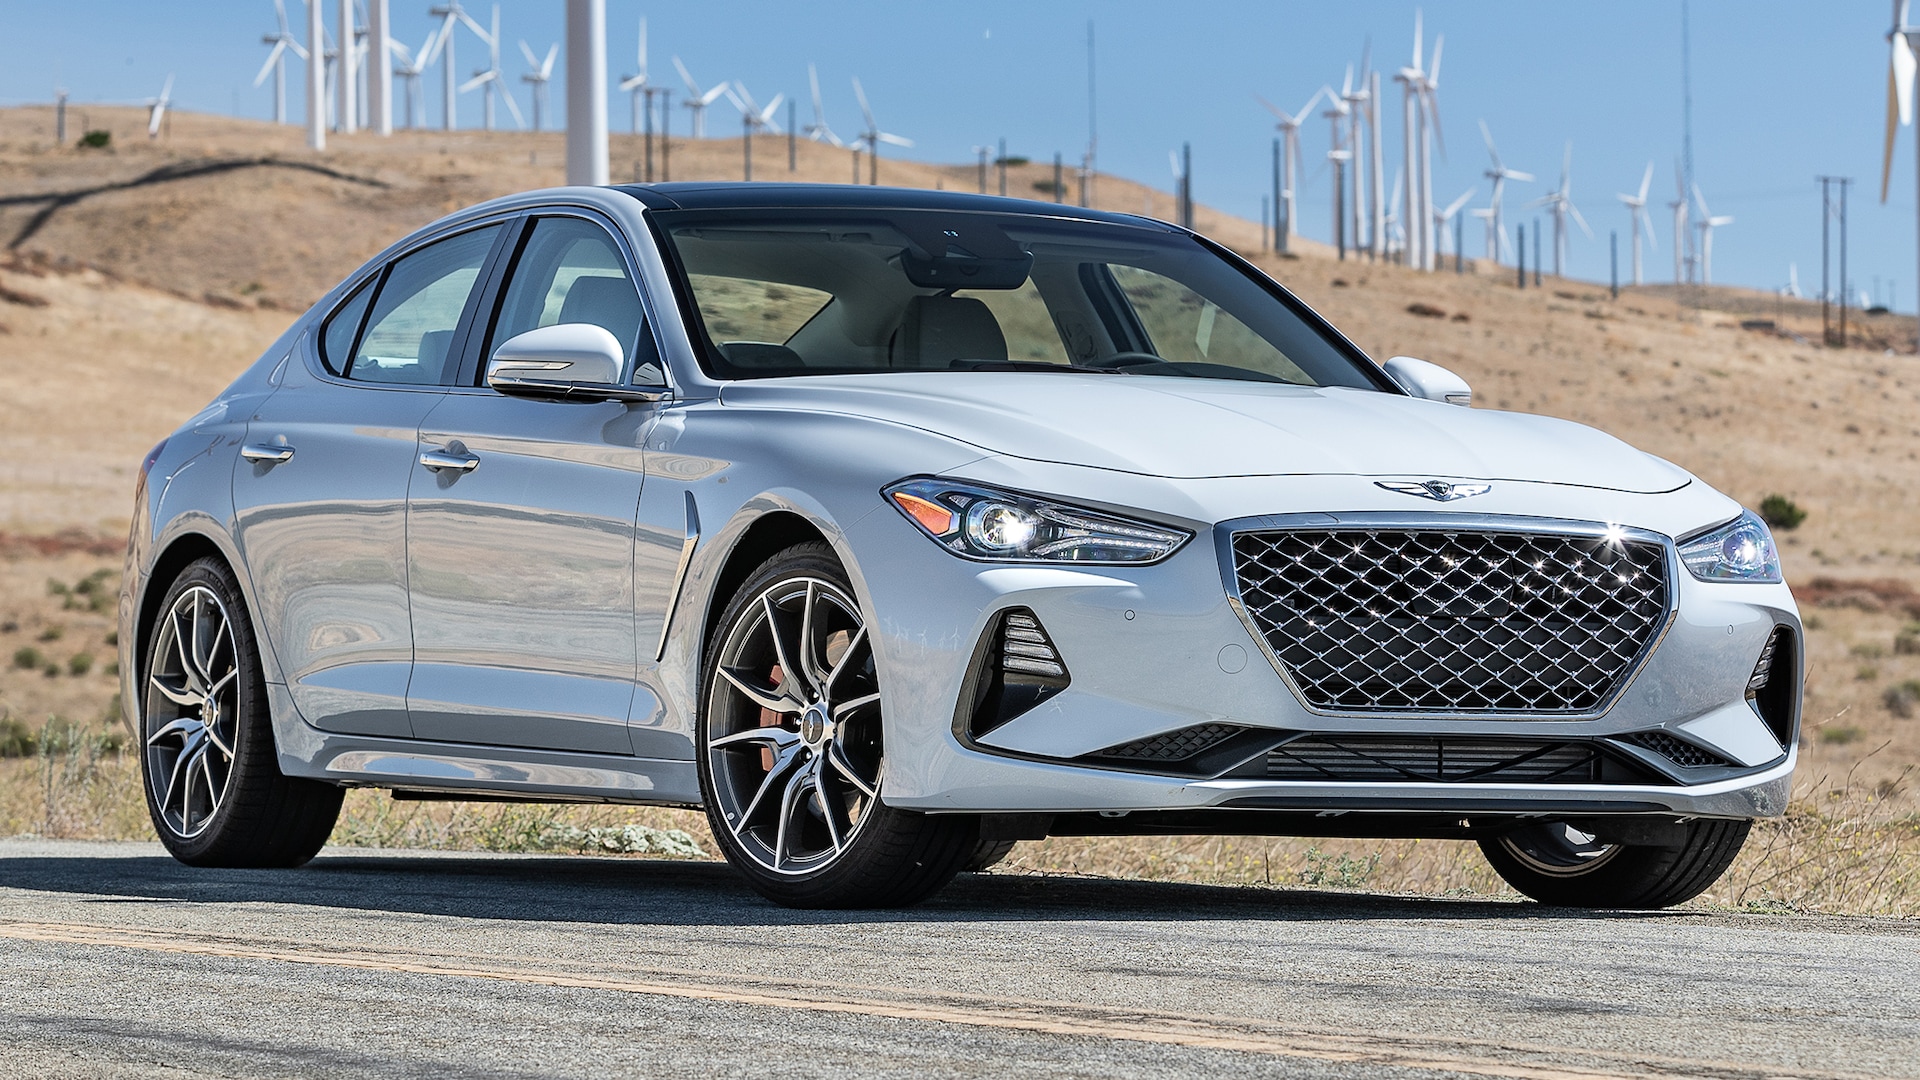 2019 Genesis G70 Long-Term Update 1: A Surprising Turn of Events